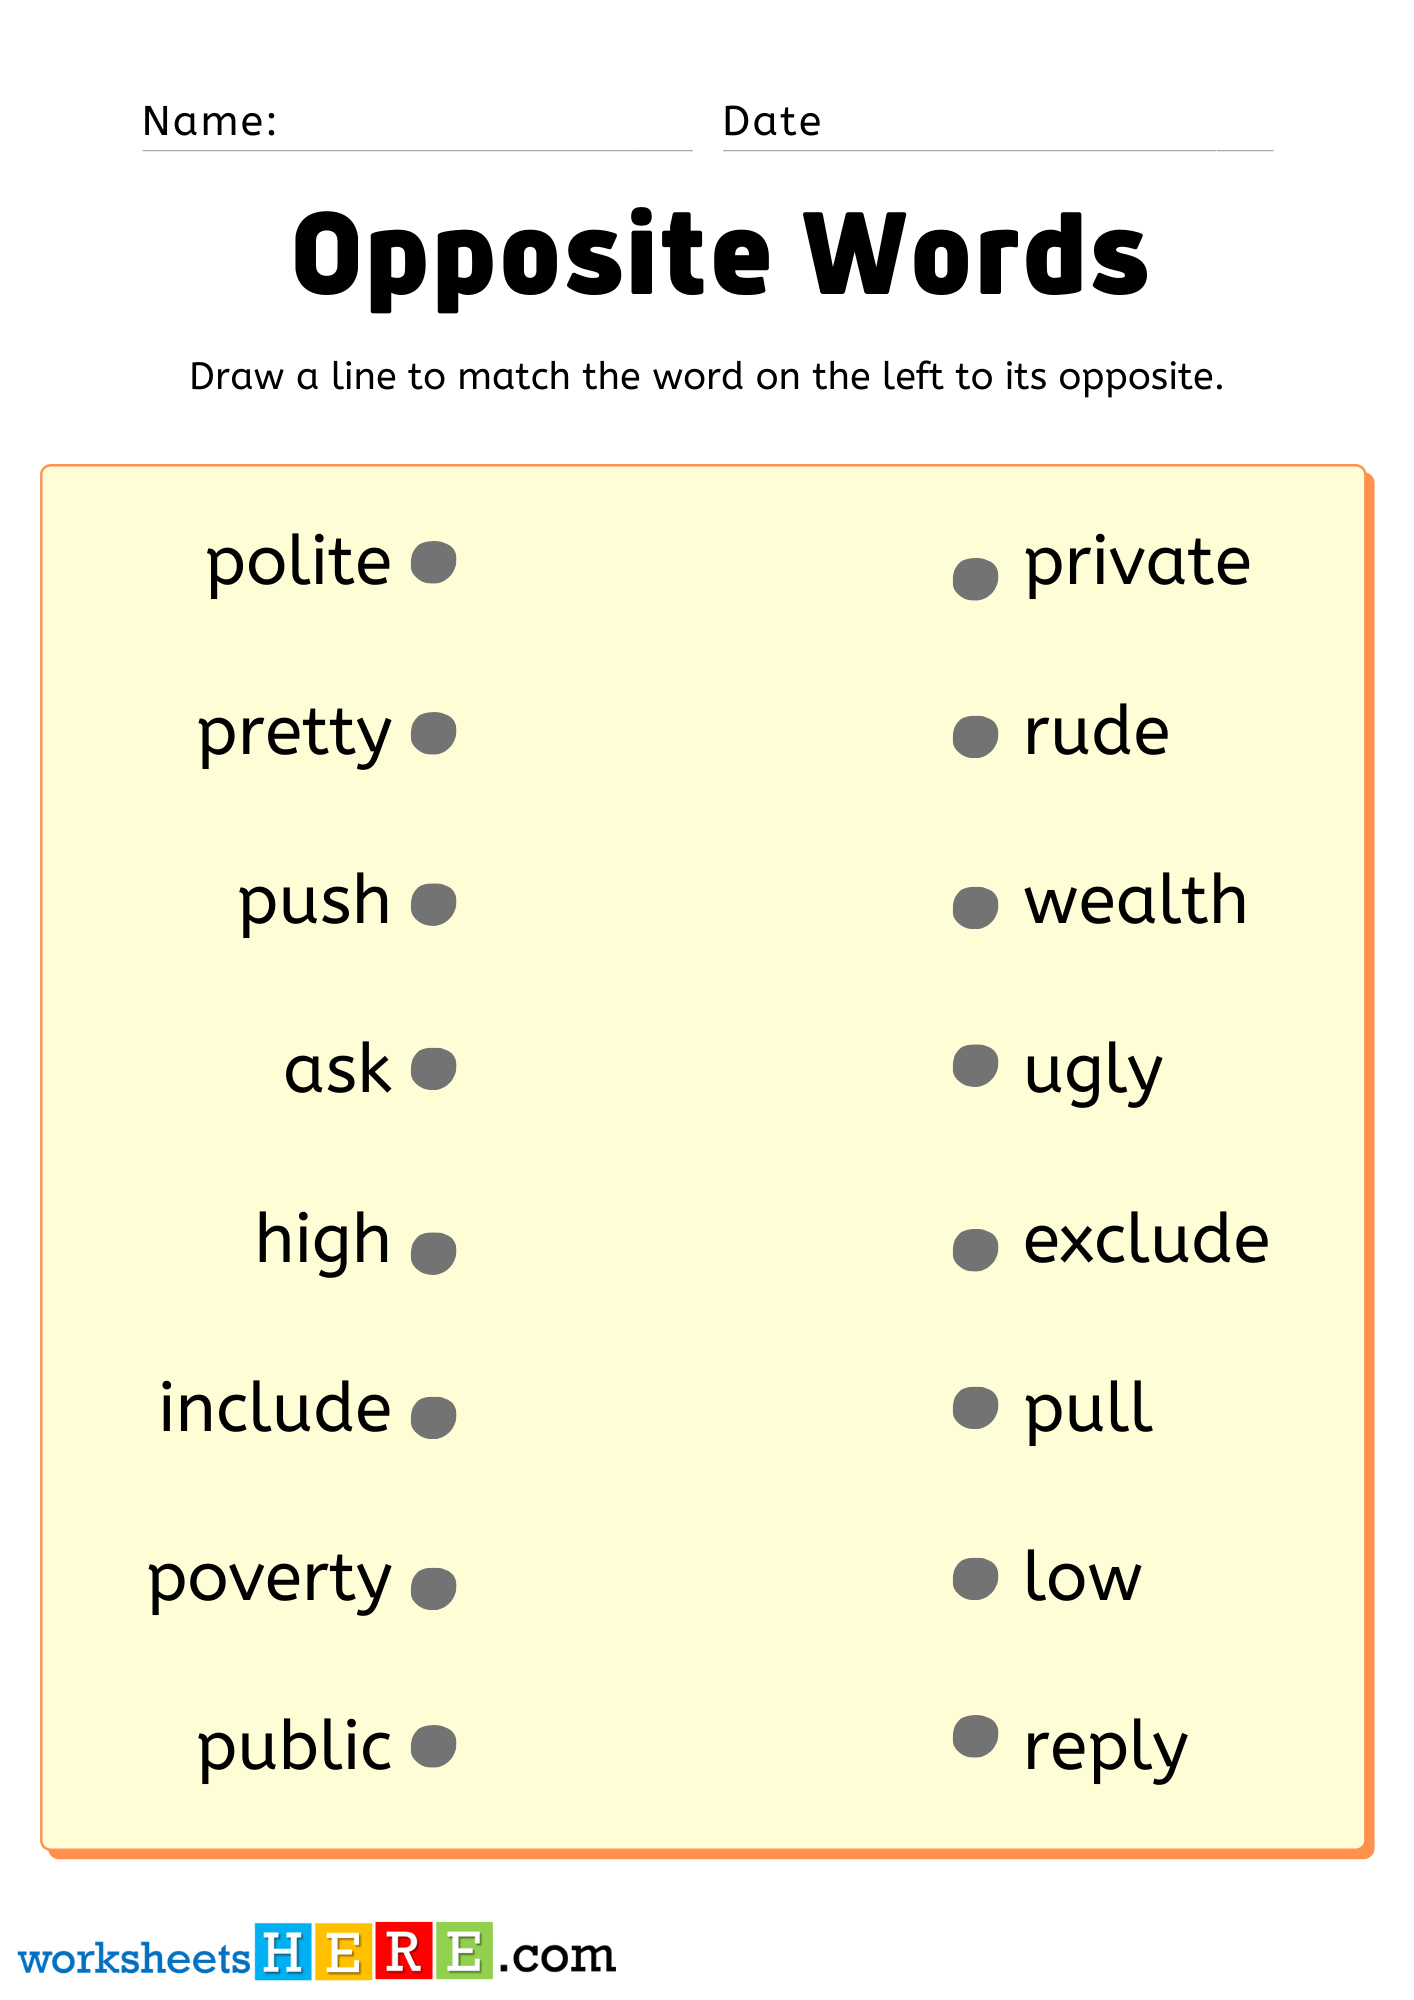 Basic Opposite Words Matching Activity Pdf Worksheets For Students